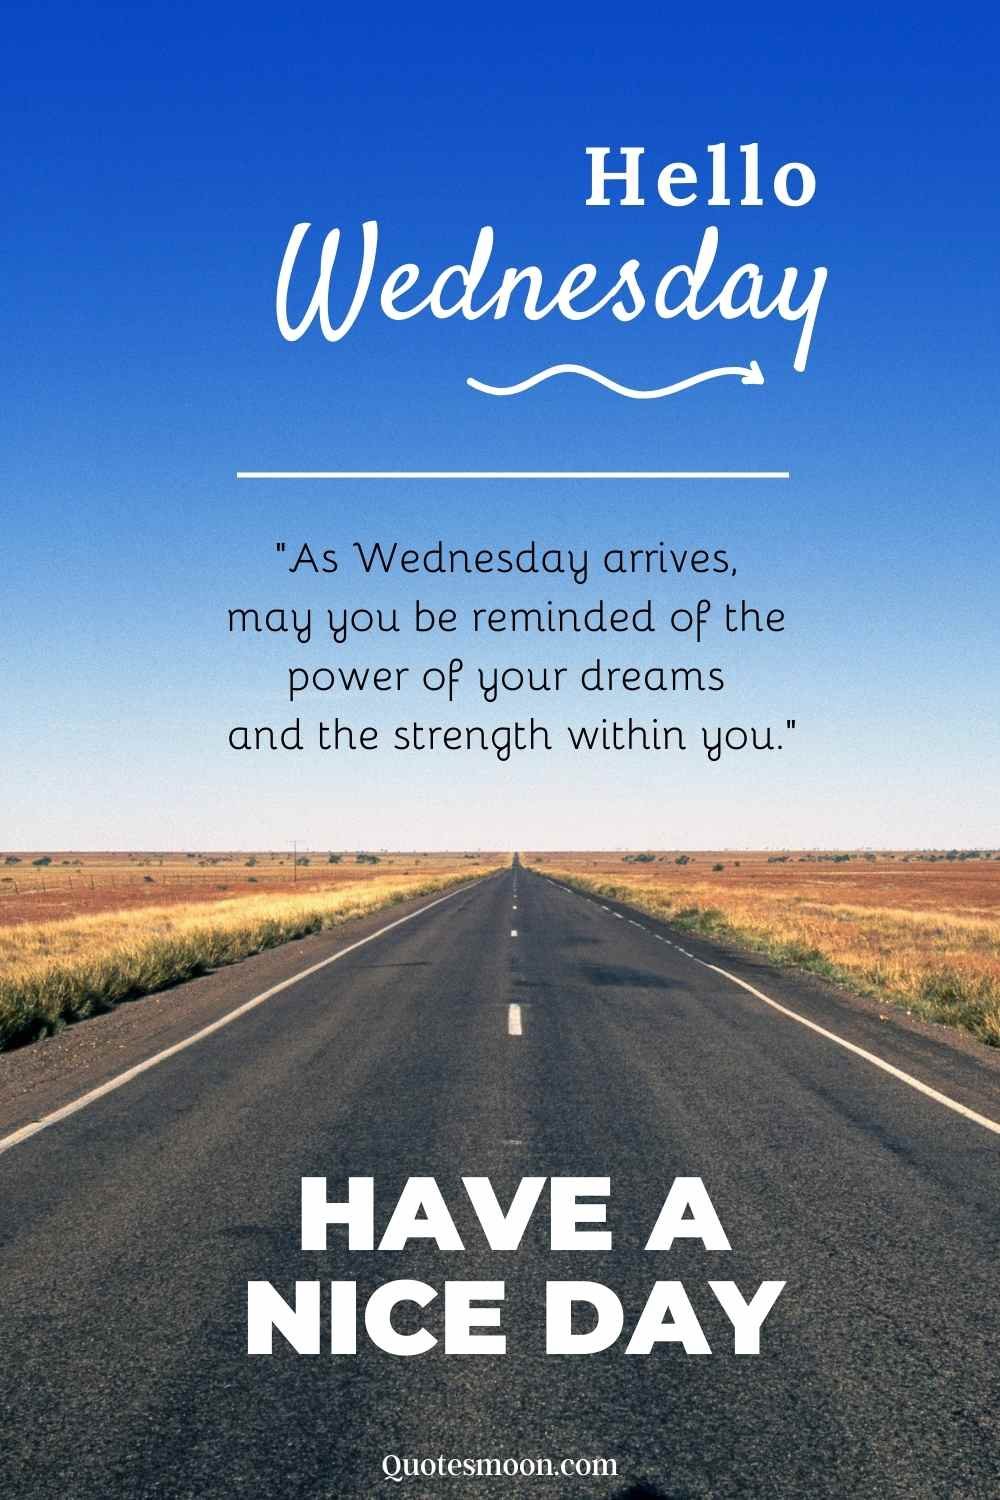 good morning wednesday blessings and prayers pics